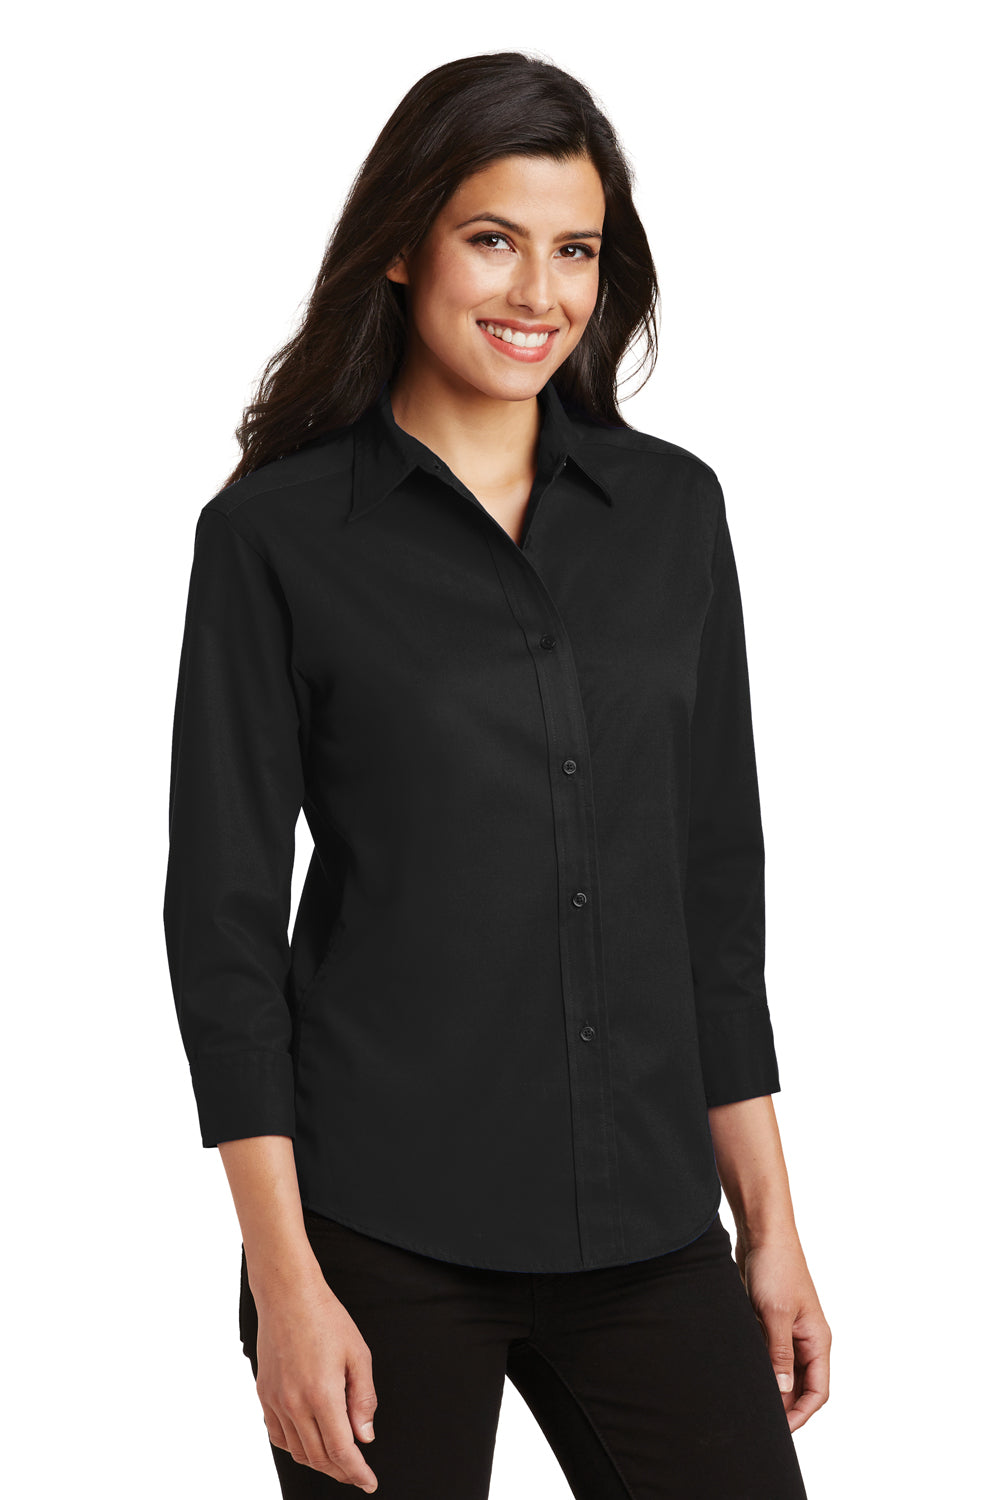 Port Authority L612 Womens Easy Care Wrinkle Resistant 3/4 Sleeve Button Down Shirt Black 3Q